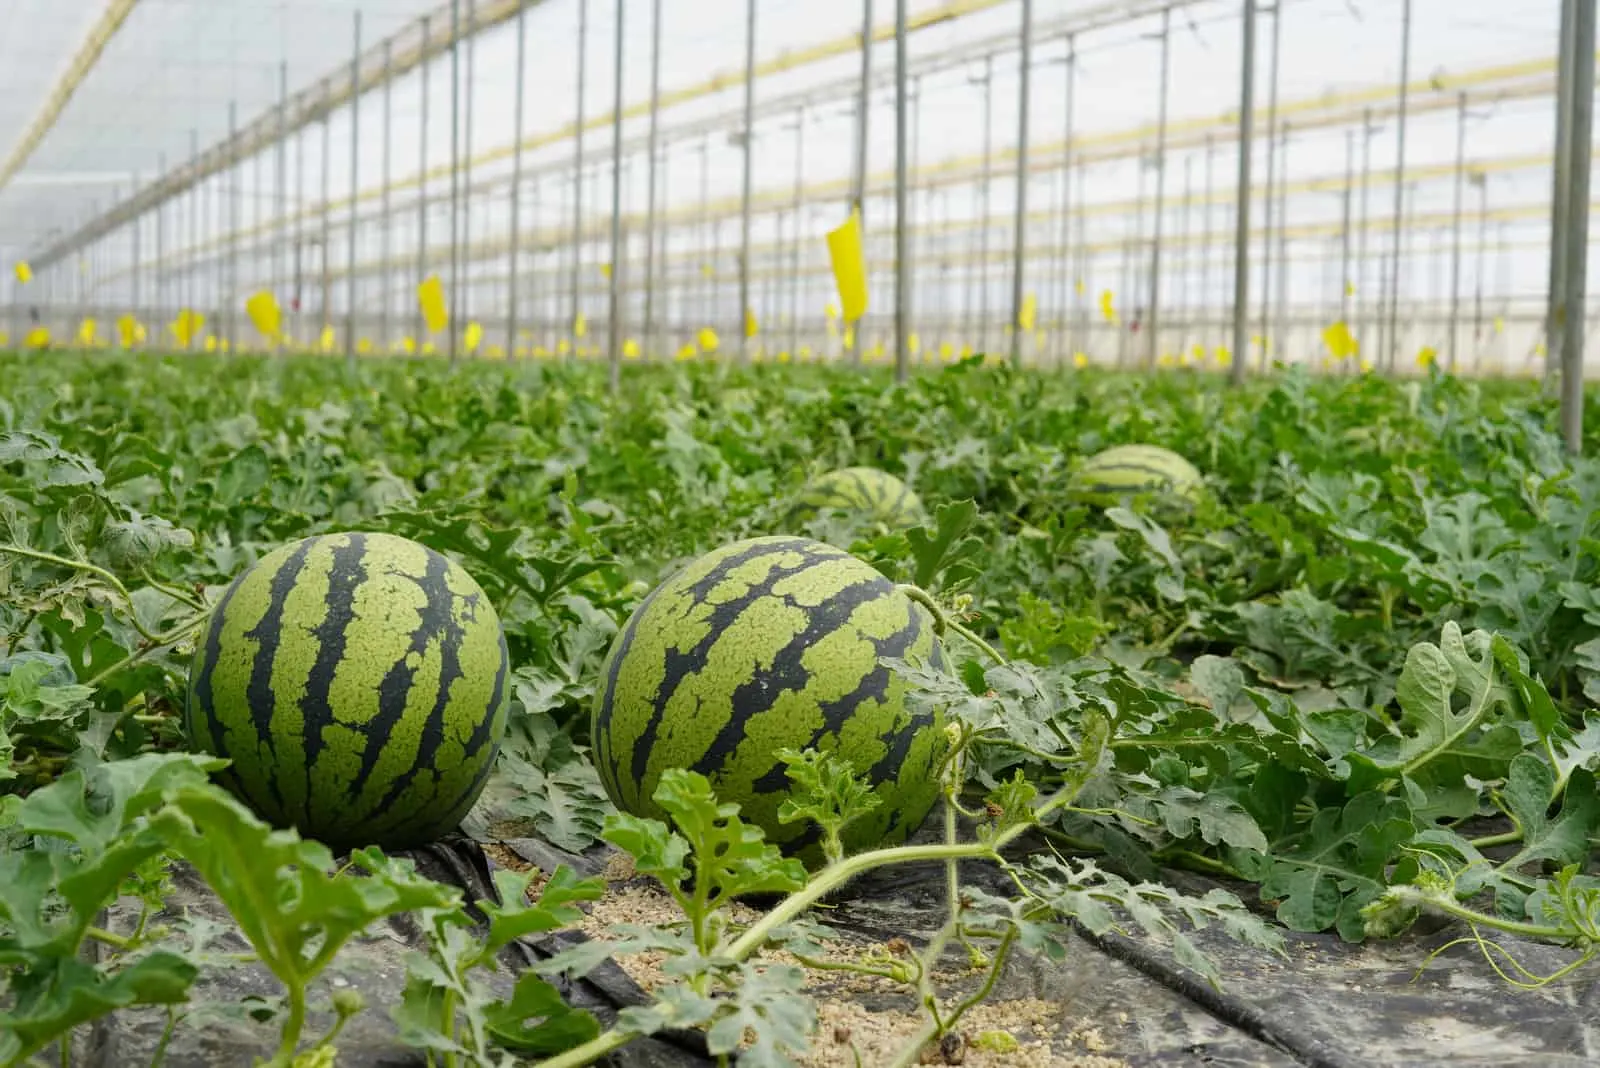 Watermelon cultivation in the greenhouse